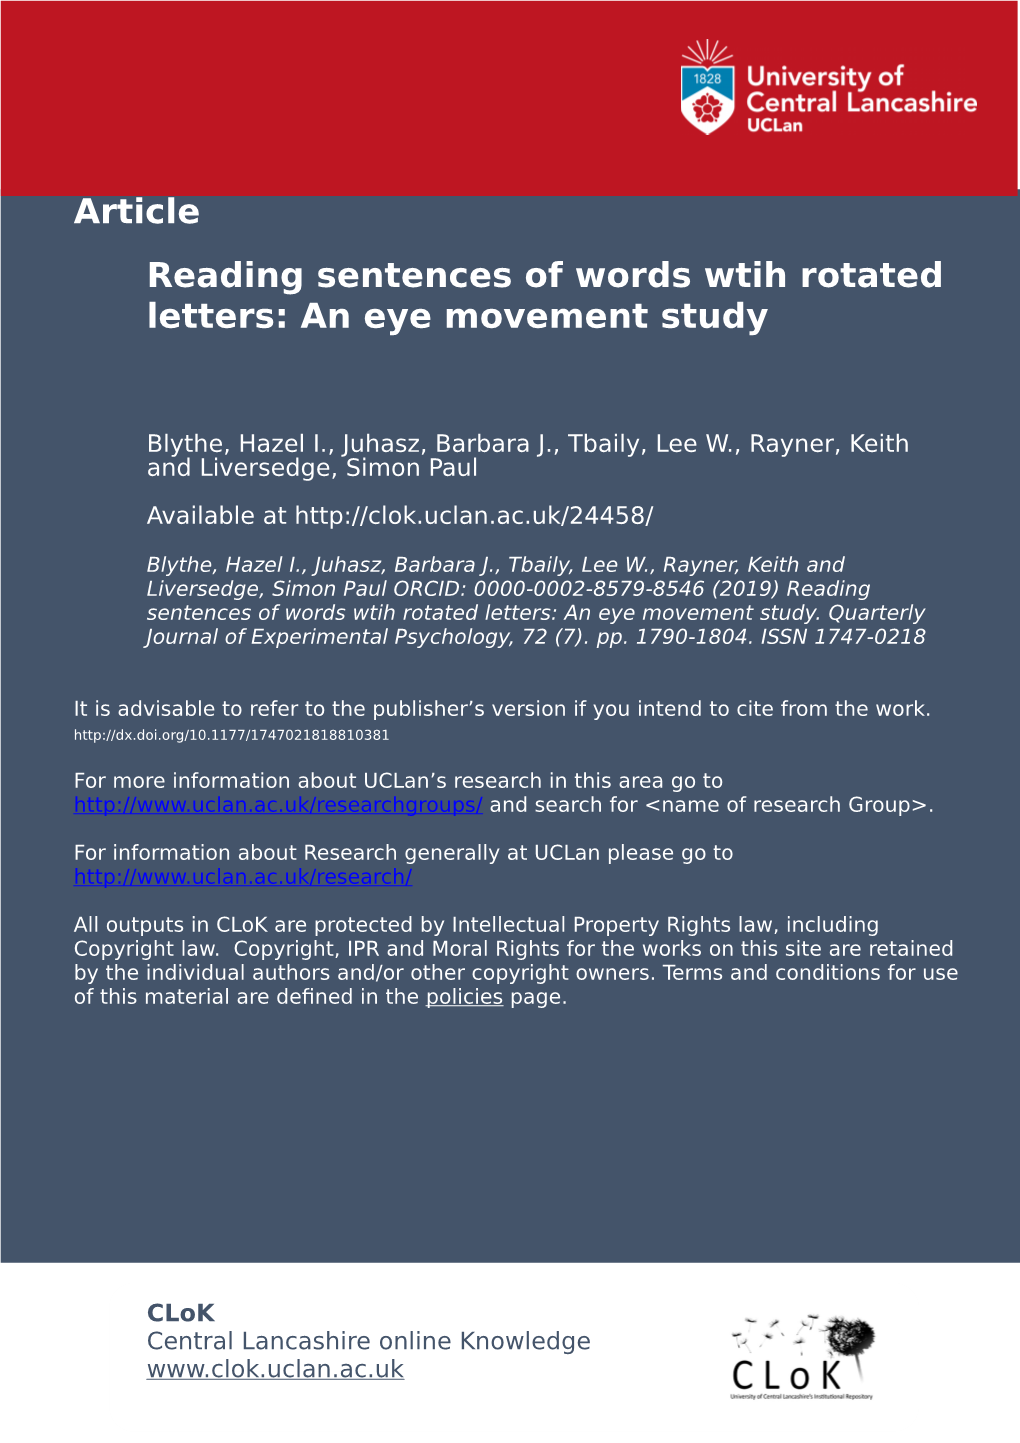 Reading Sentences of Words with Rotated Letters: an Eye Movement Study